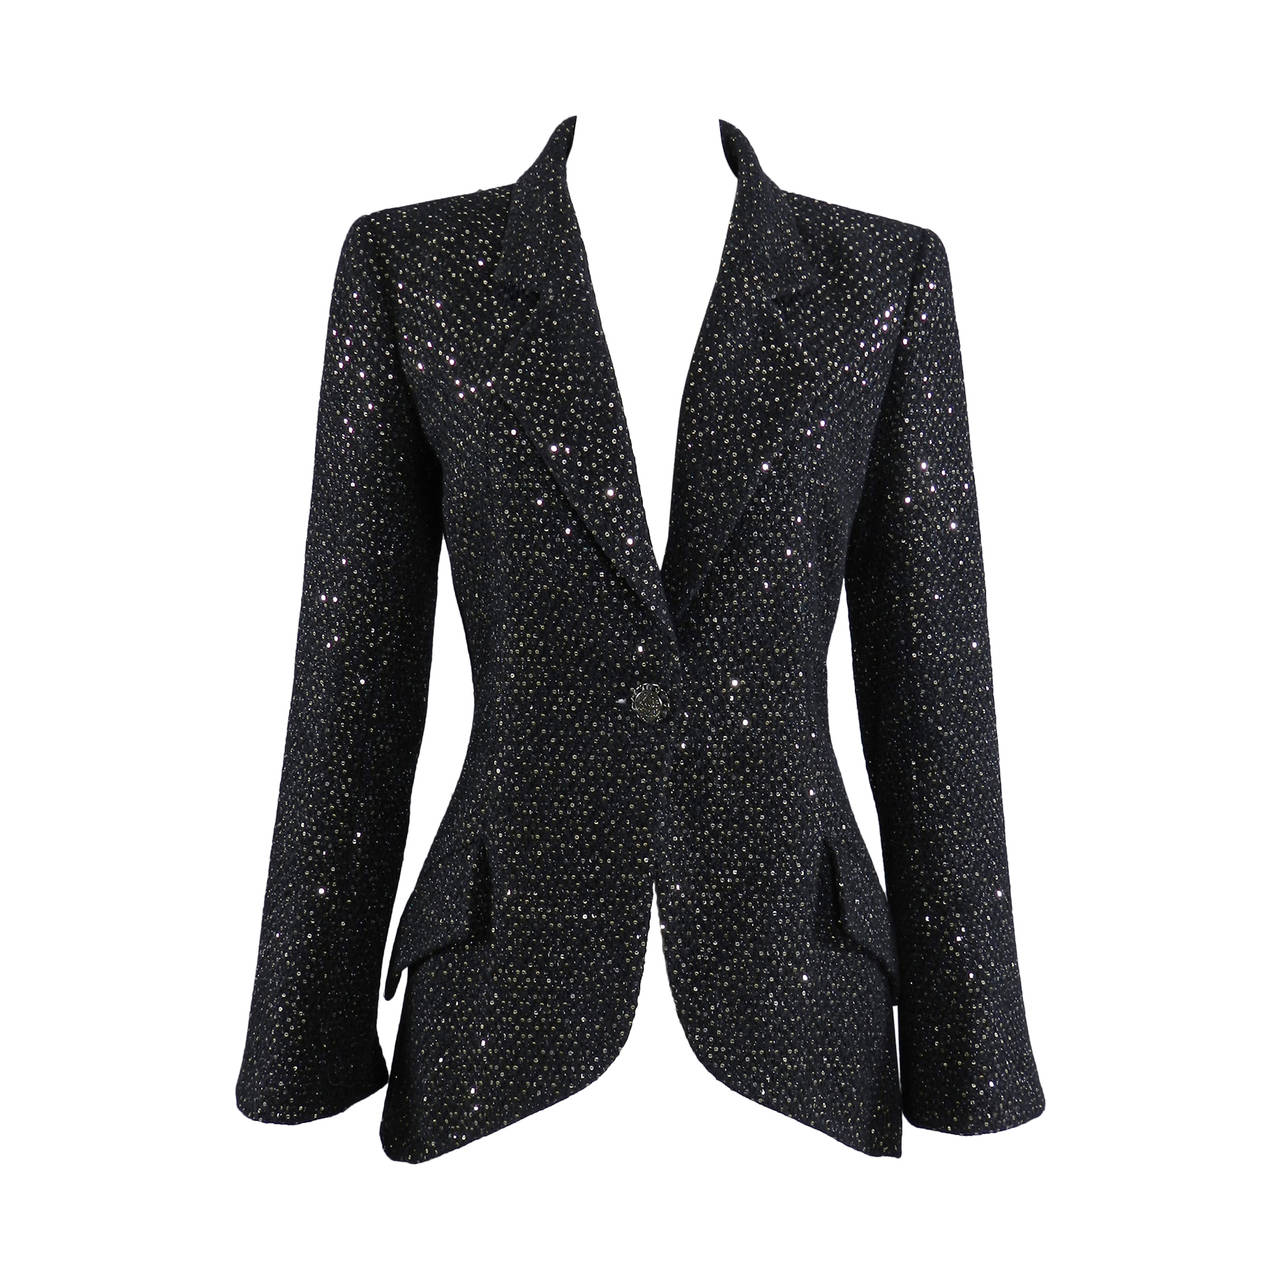 Chanel 11C Black Ad Campaign / Runway Jacket with Silver Sequins